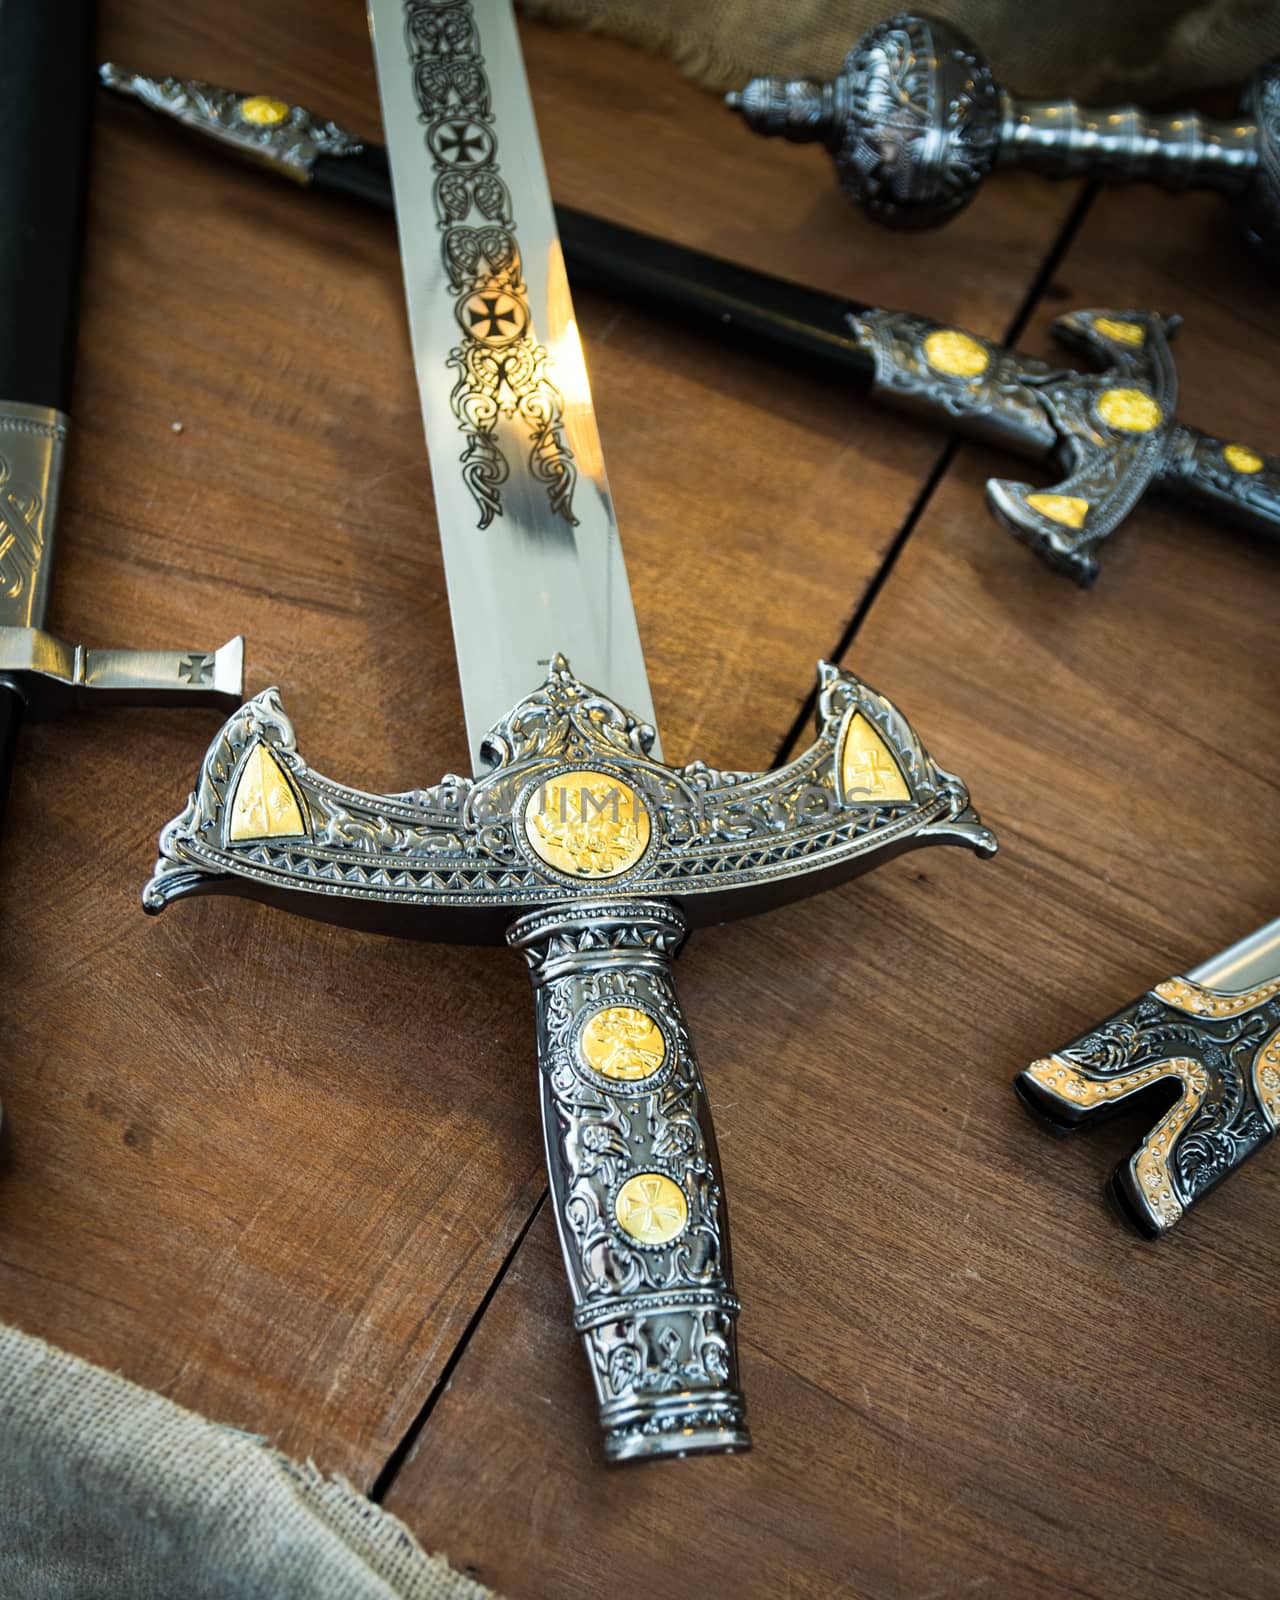 Detail of the hilt of a sword. by Isaac74